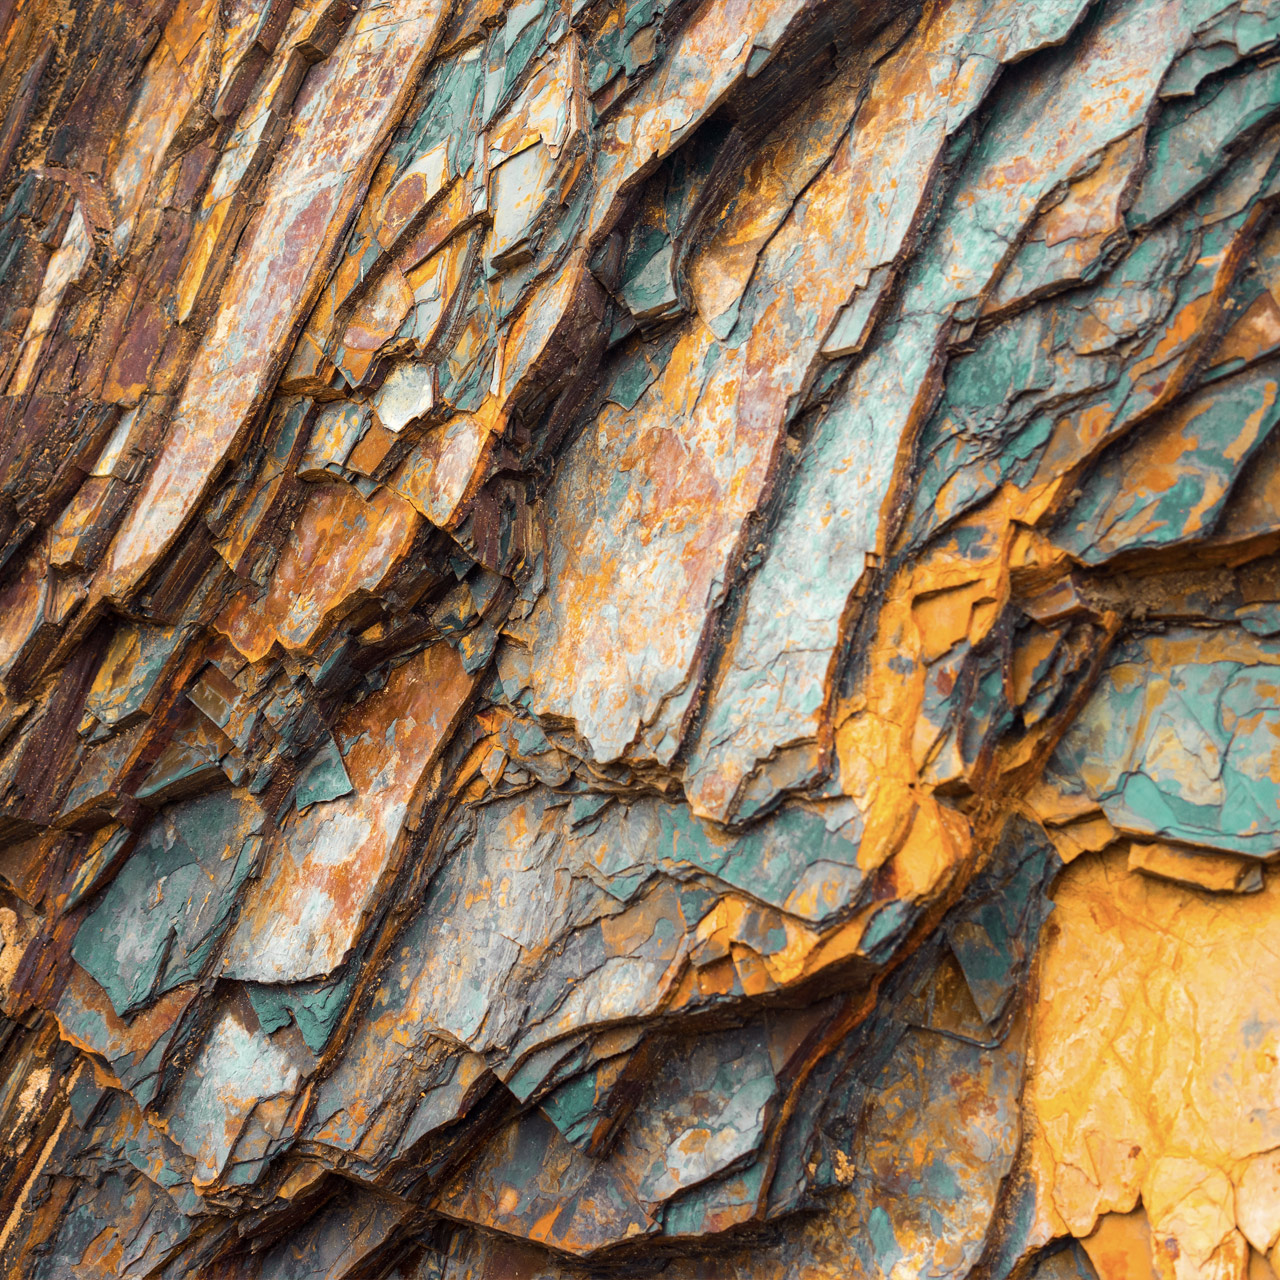 Rock layers , a colorful formation of rocks stacked over time.